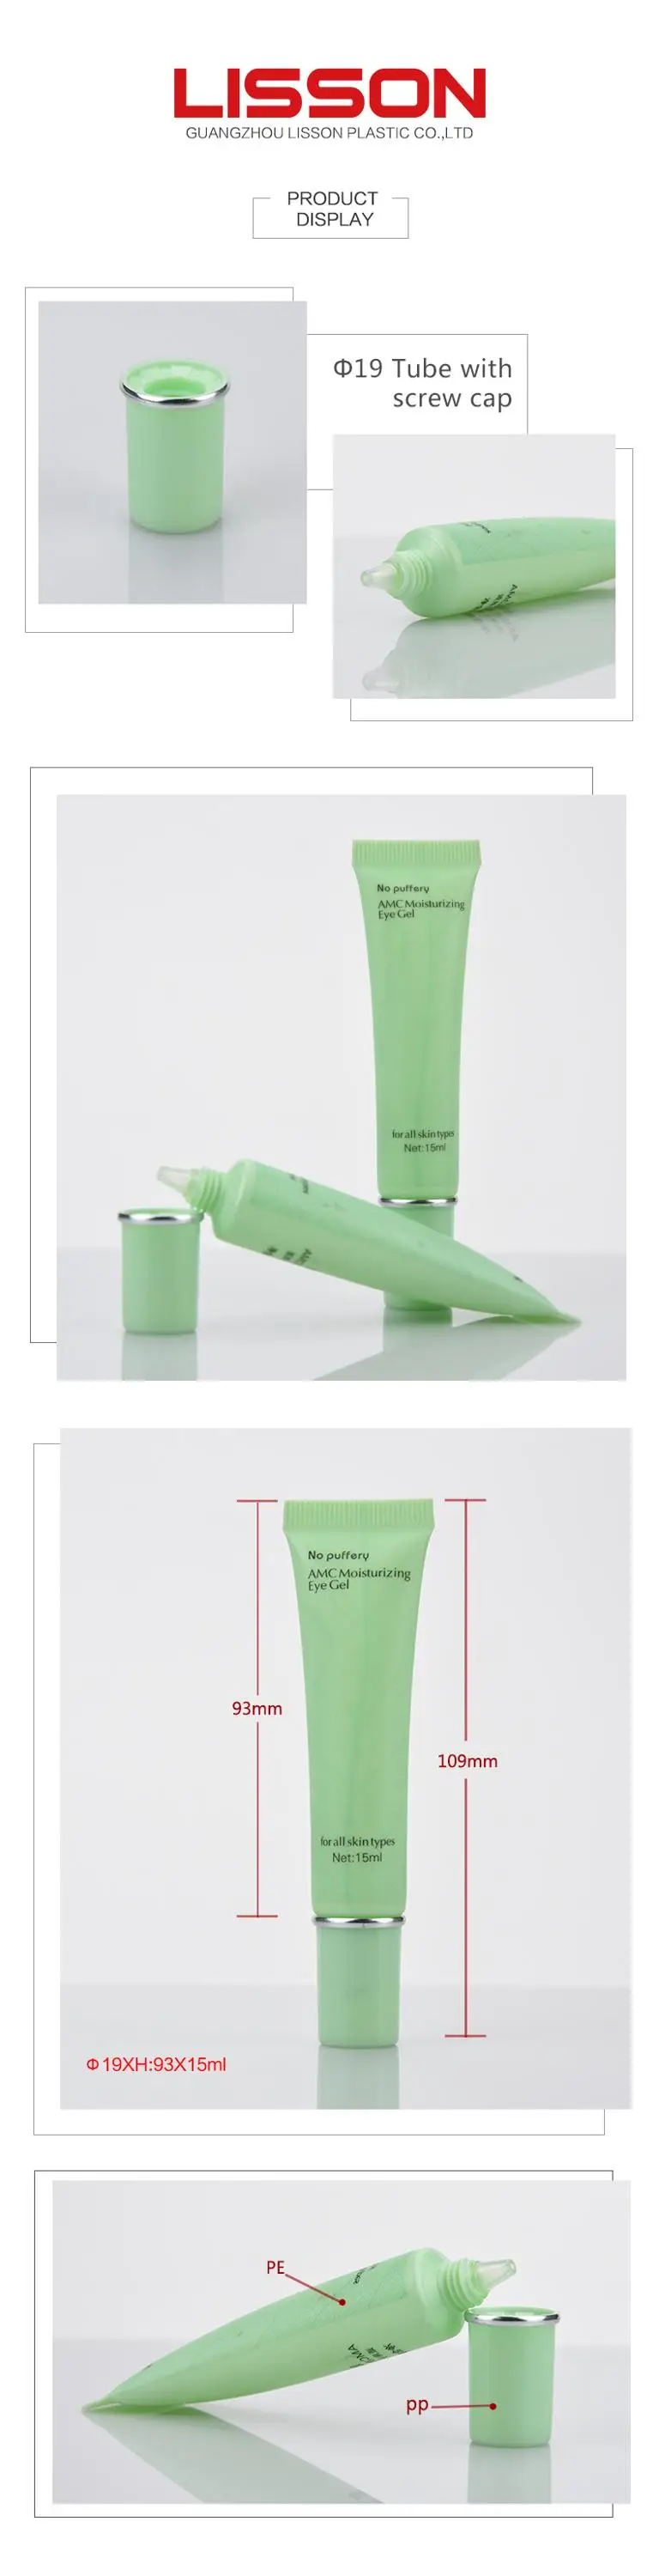 Eye Cream Cosmetic Packaging Tube With Thick Double Layer cylindrical Cap